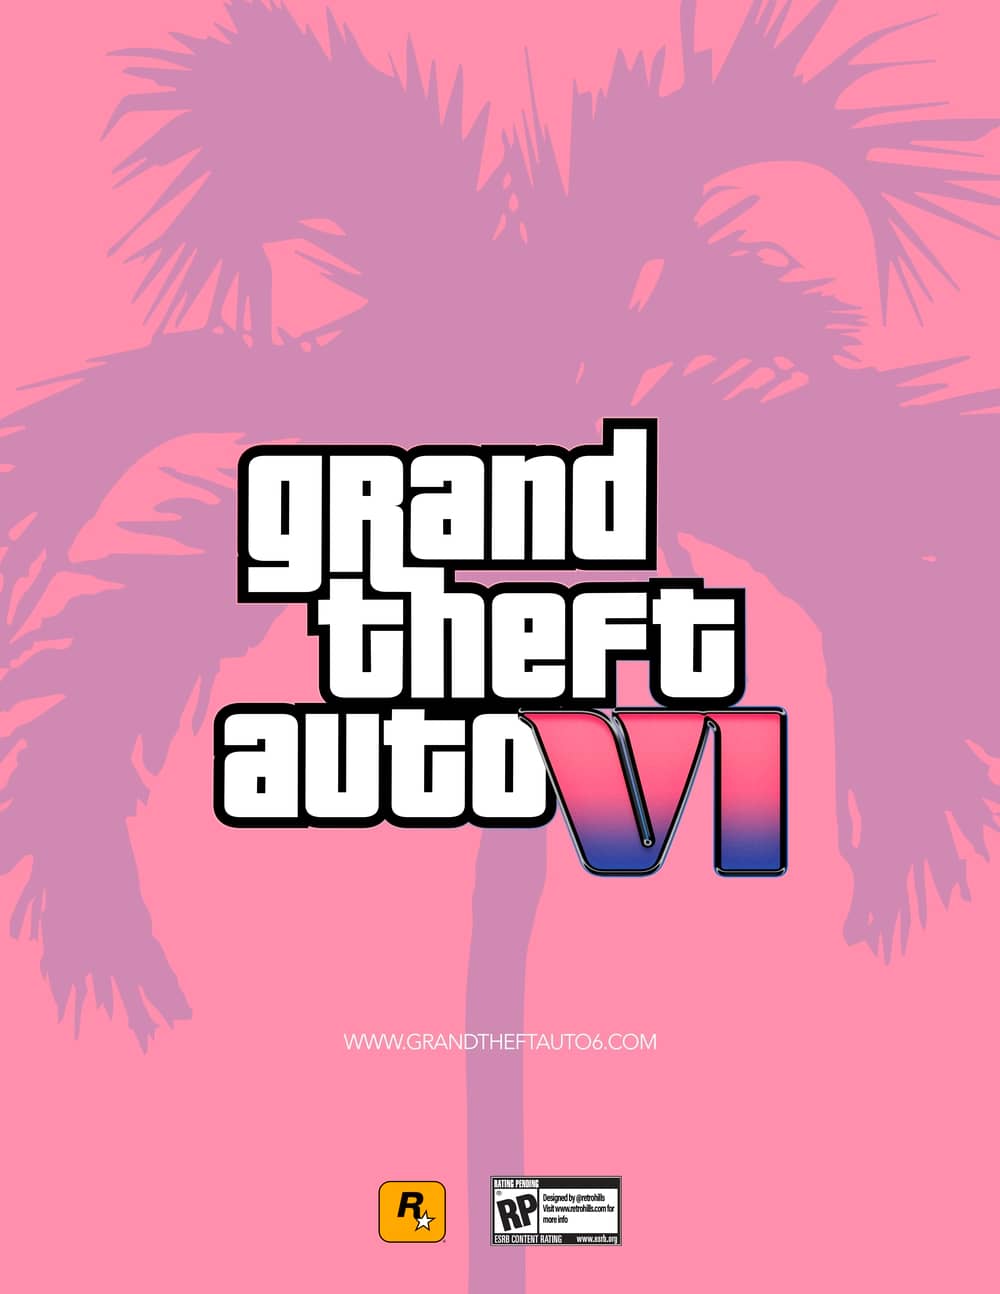 Grand Theft Auto 6 Vice City by GerryRoque